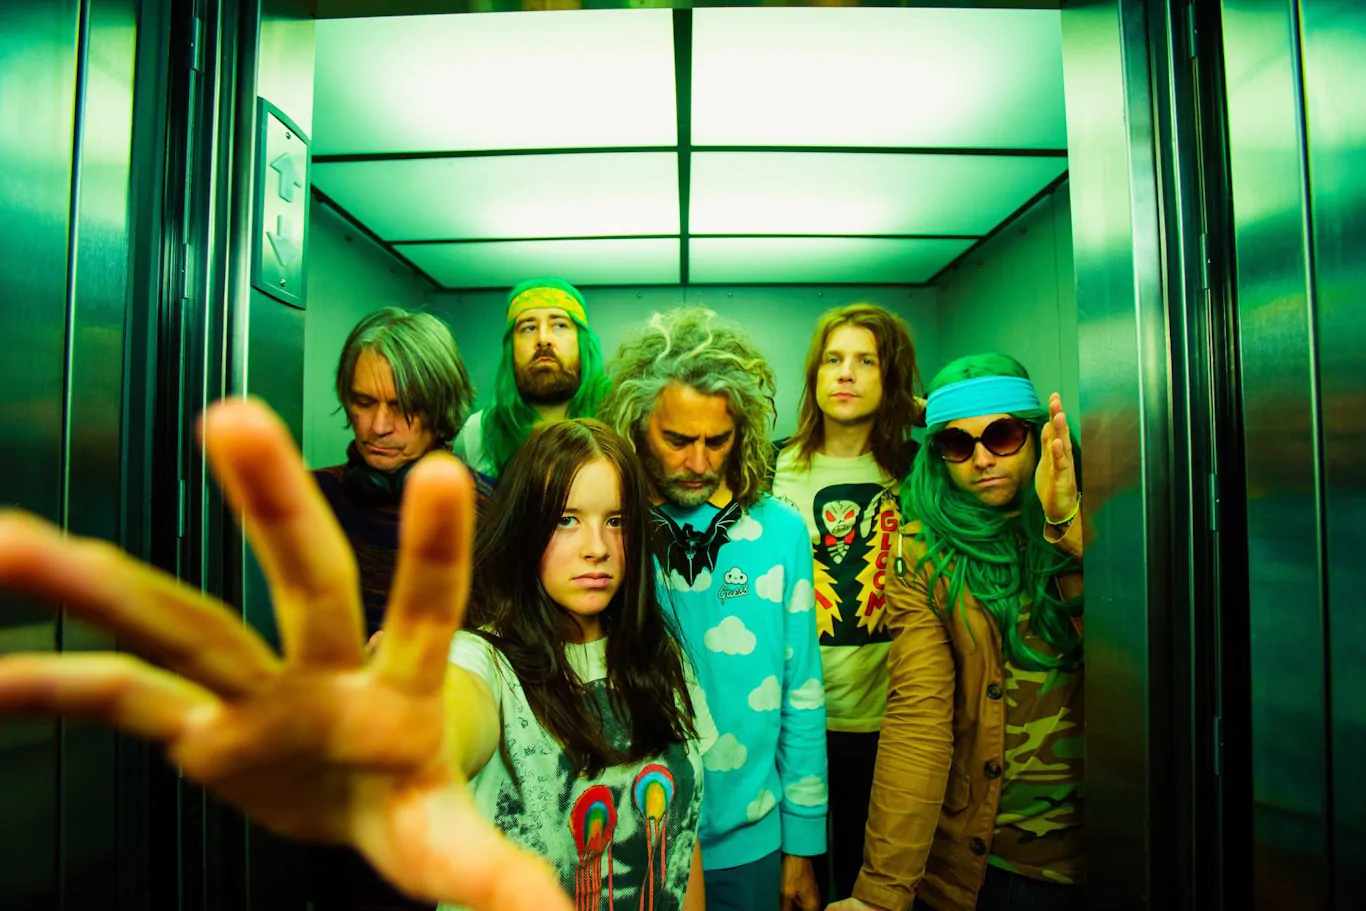 NELL & THE FLAMING LIPS share video for ‘Red Right Hand’ from ‘Where the Viaduct Looms’, an album of Nick Cave cover versions